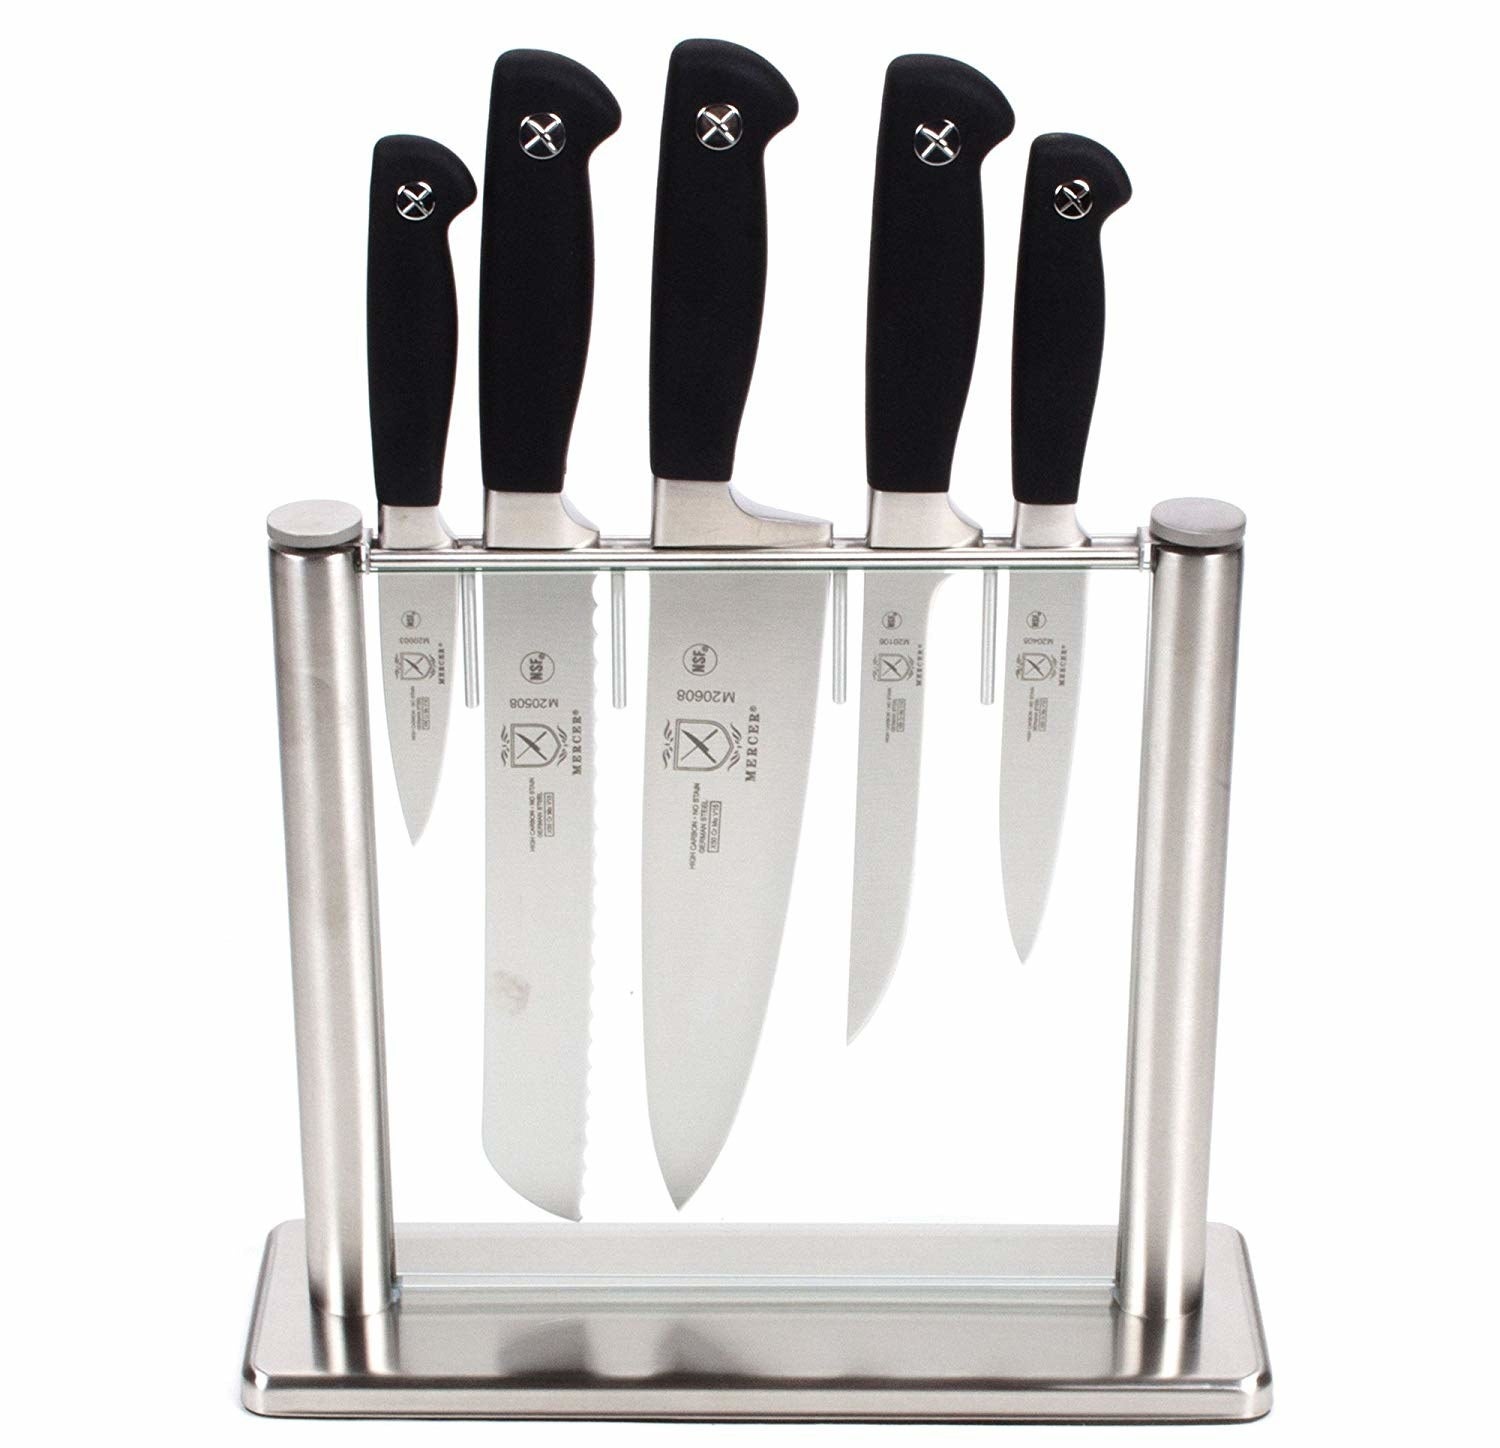 Five knives held in a glass knife block